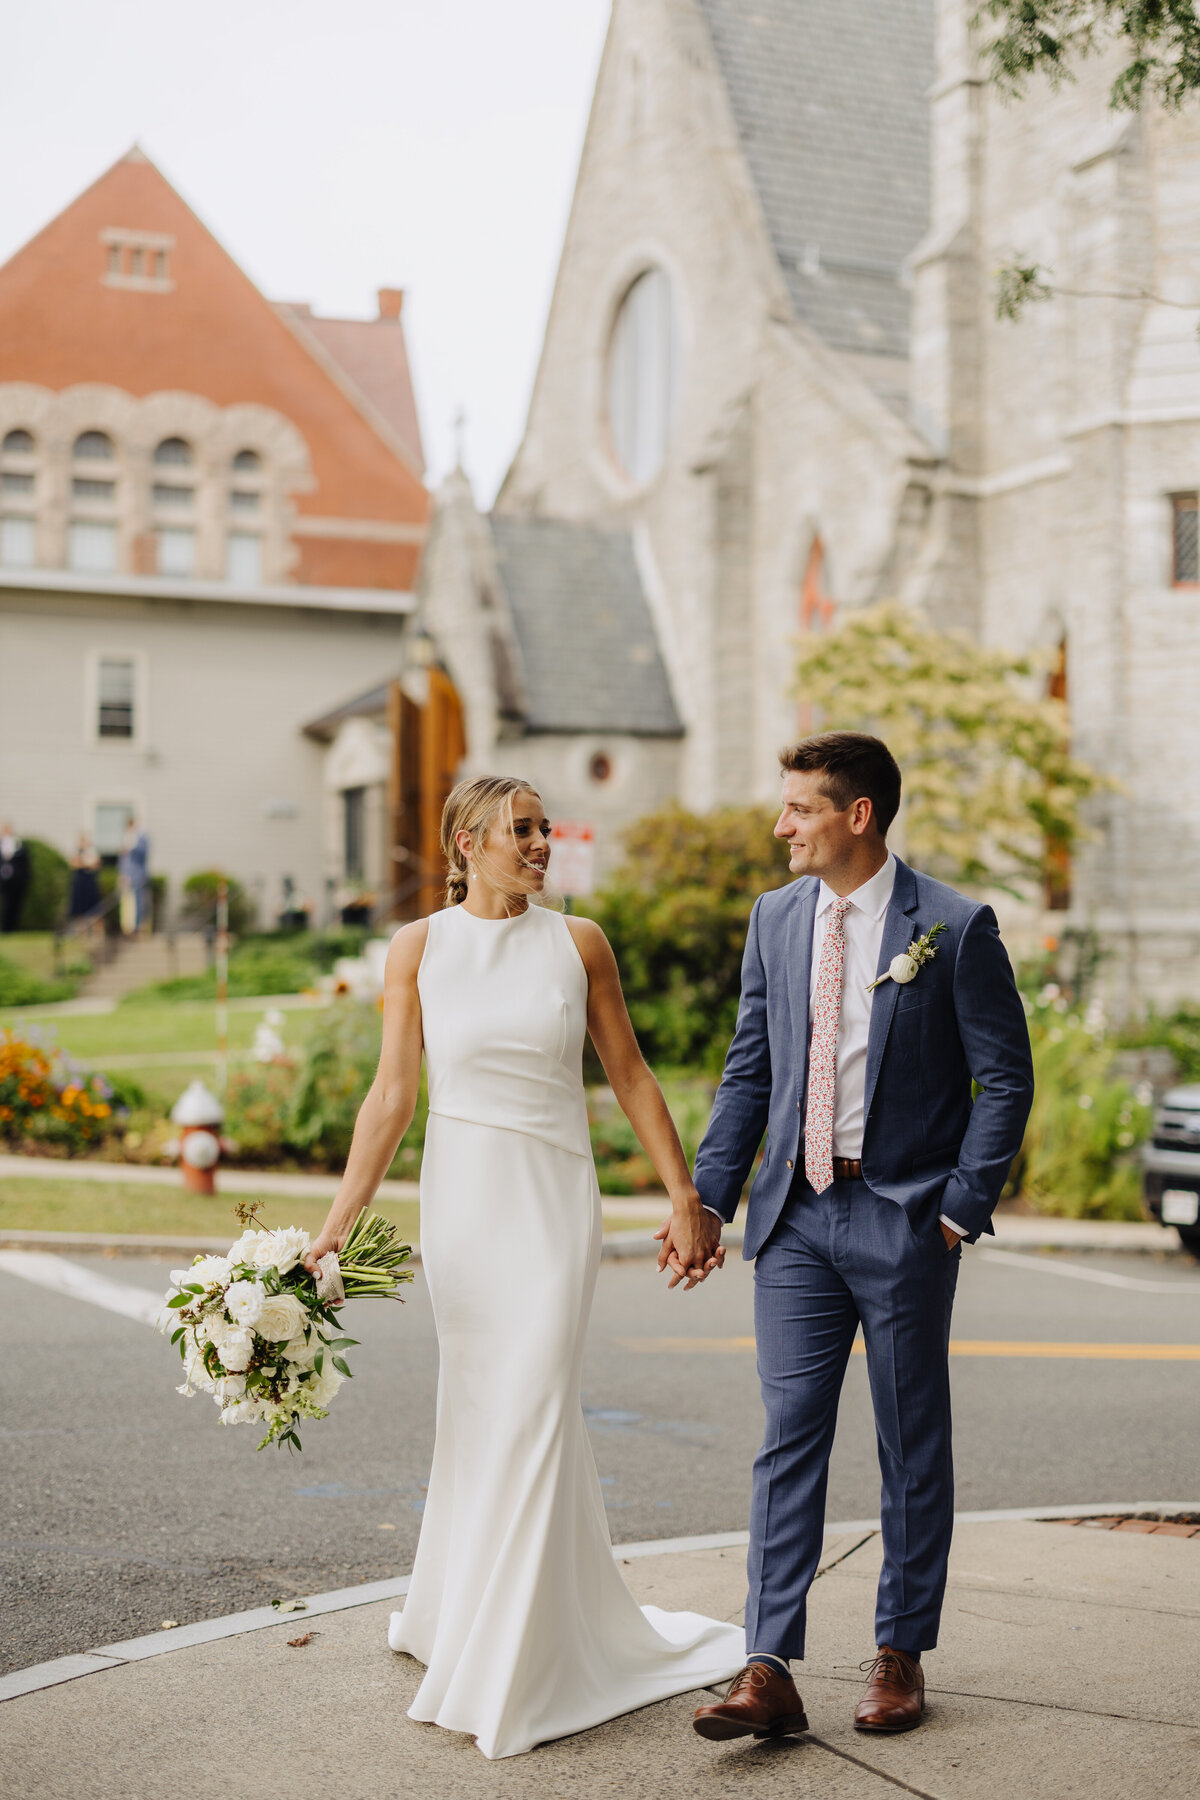 Witness the magic of this breathtaking moment at Quonquont Farm Wedding, skillfully captured by photographer Matthew Cavanaugh.